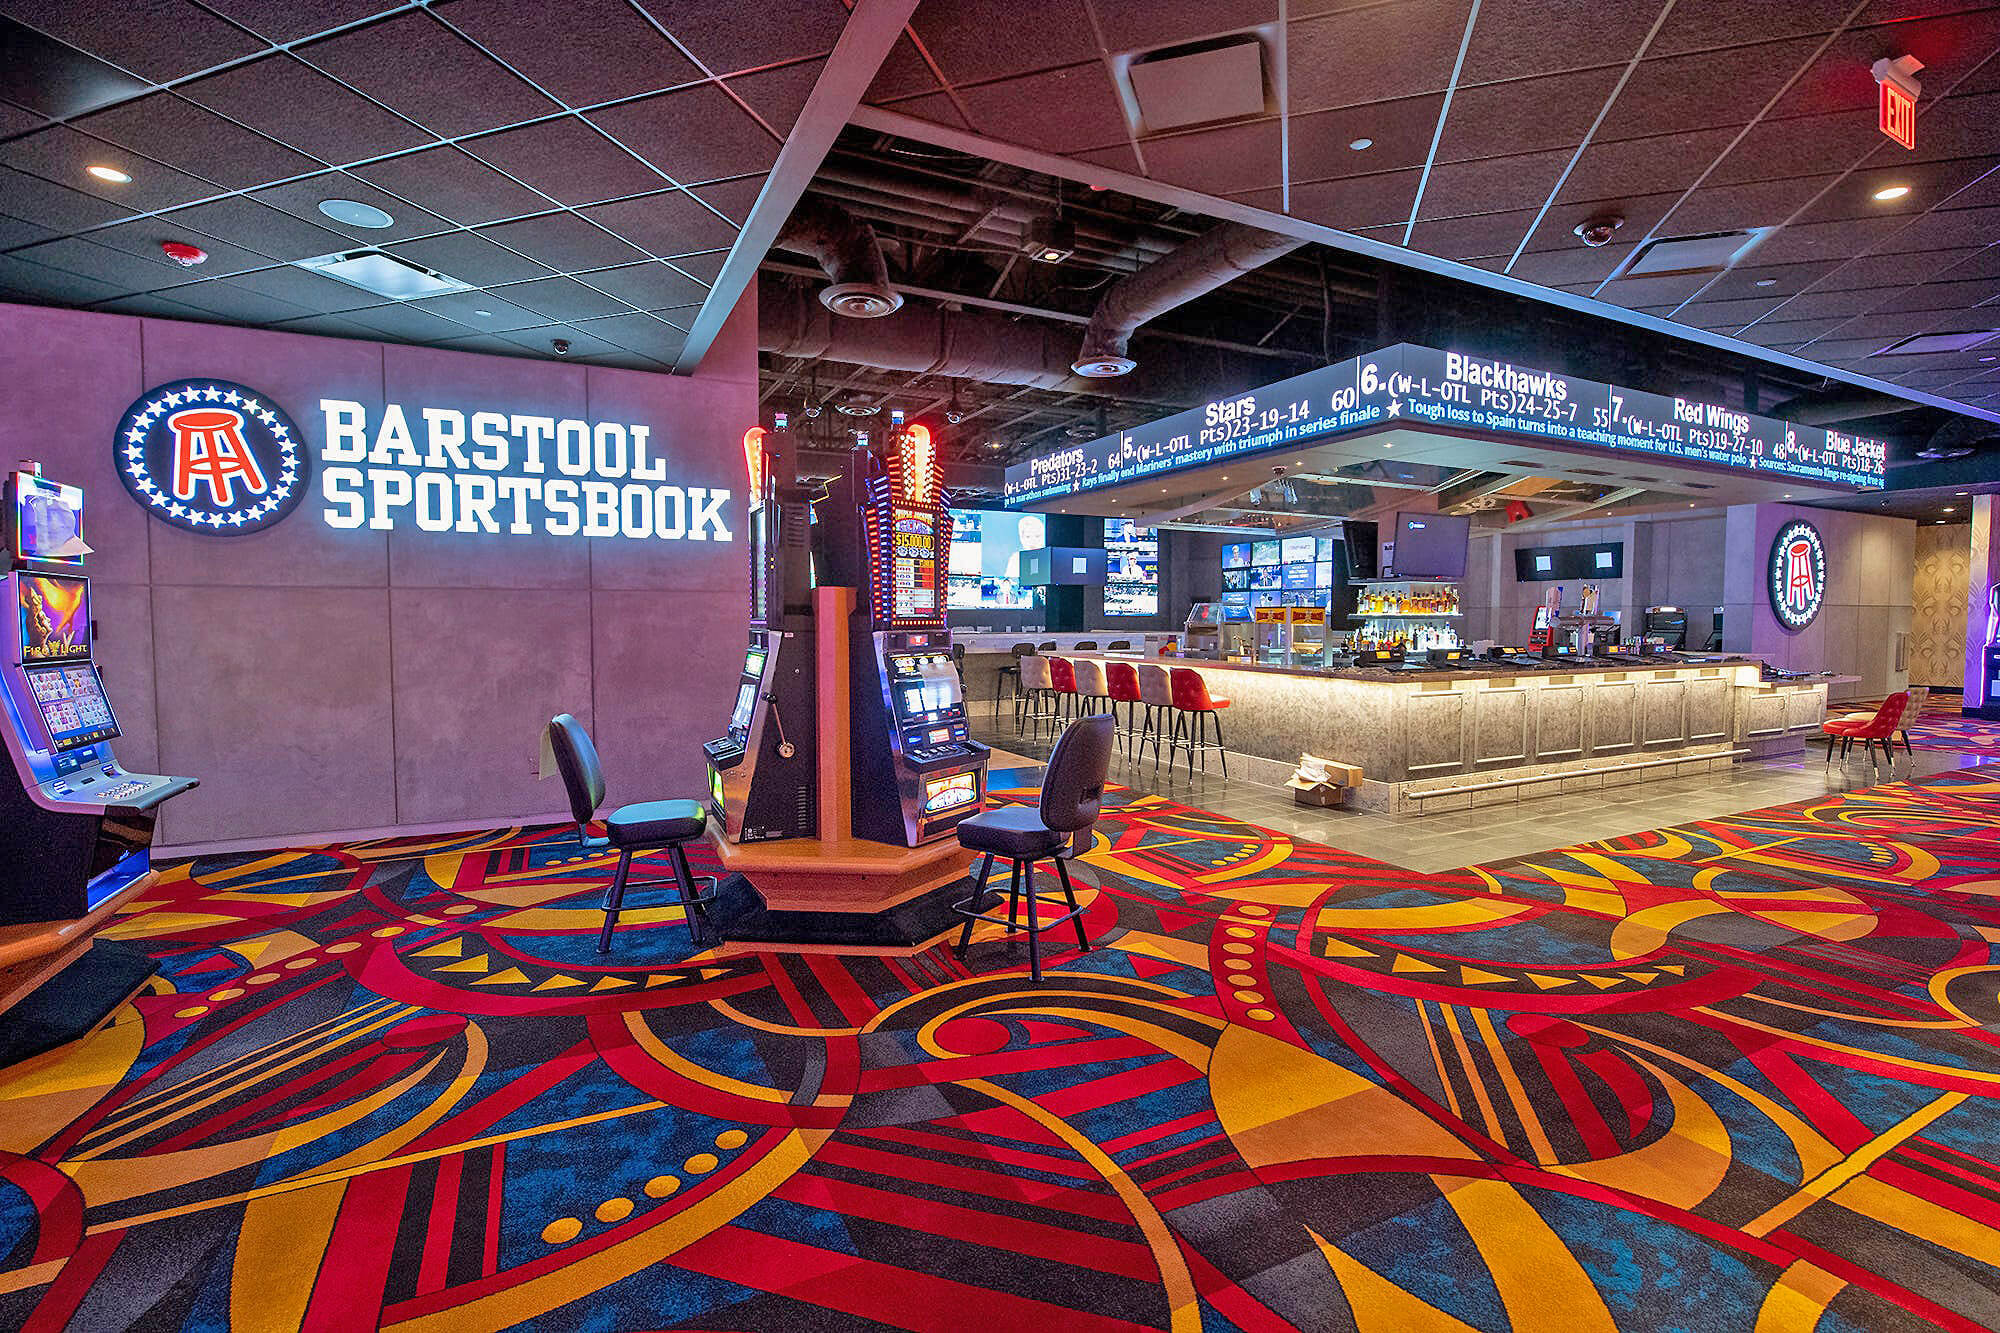 Ohio Sports Betting: Owners of Barstool Sportsbook, Football HOF Village, Apply for Licenses